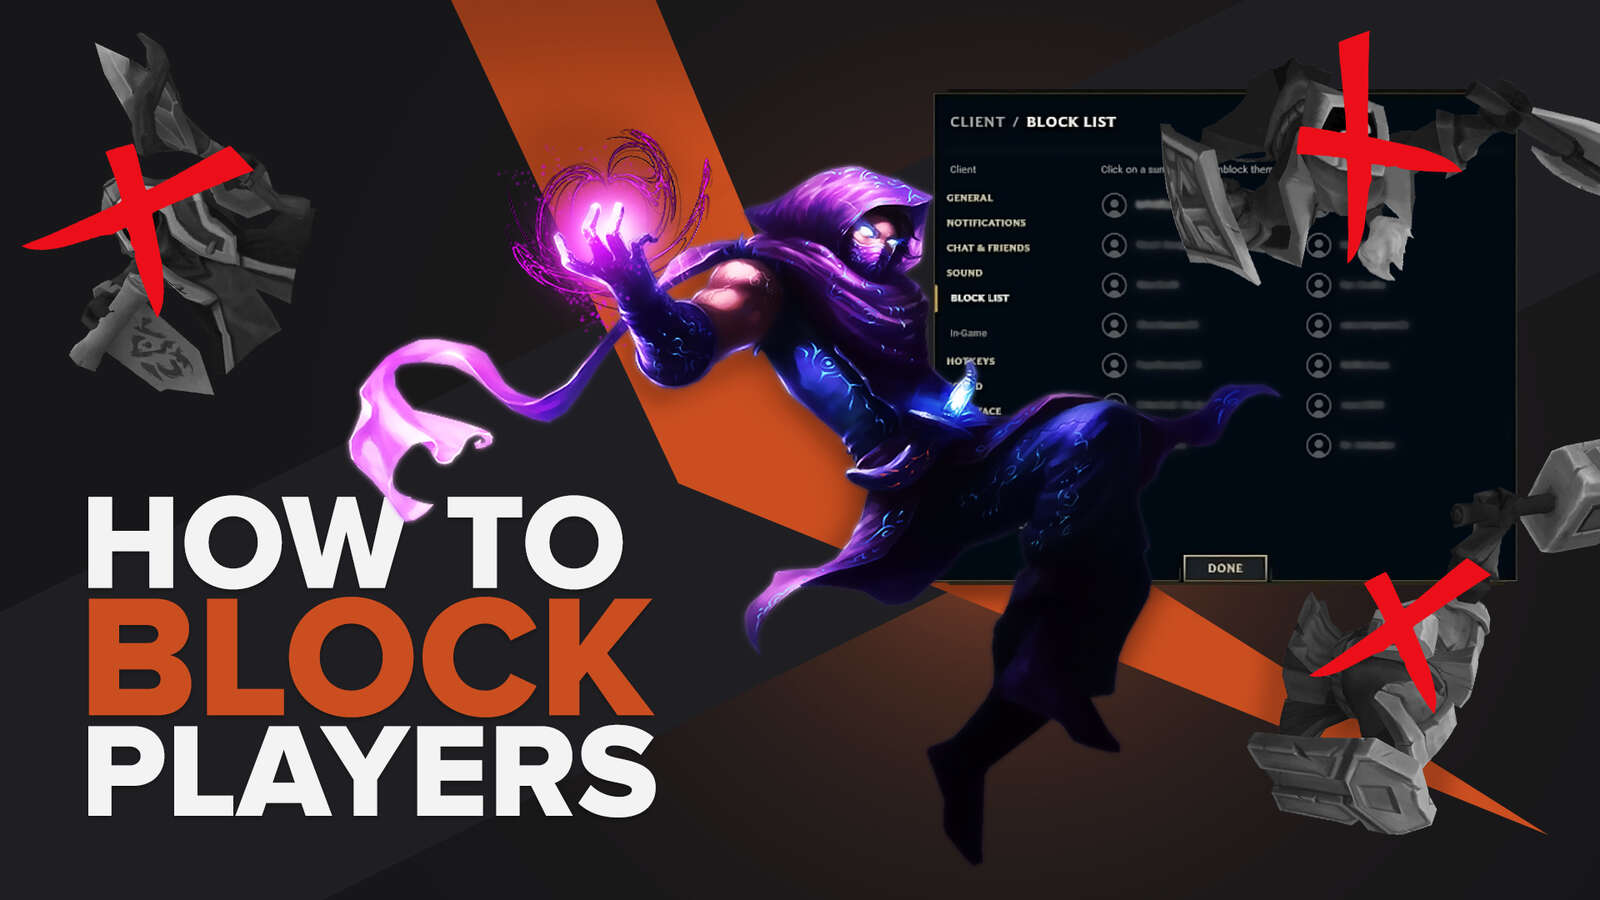 How to block someone in League of Legends